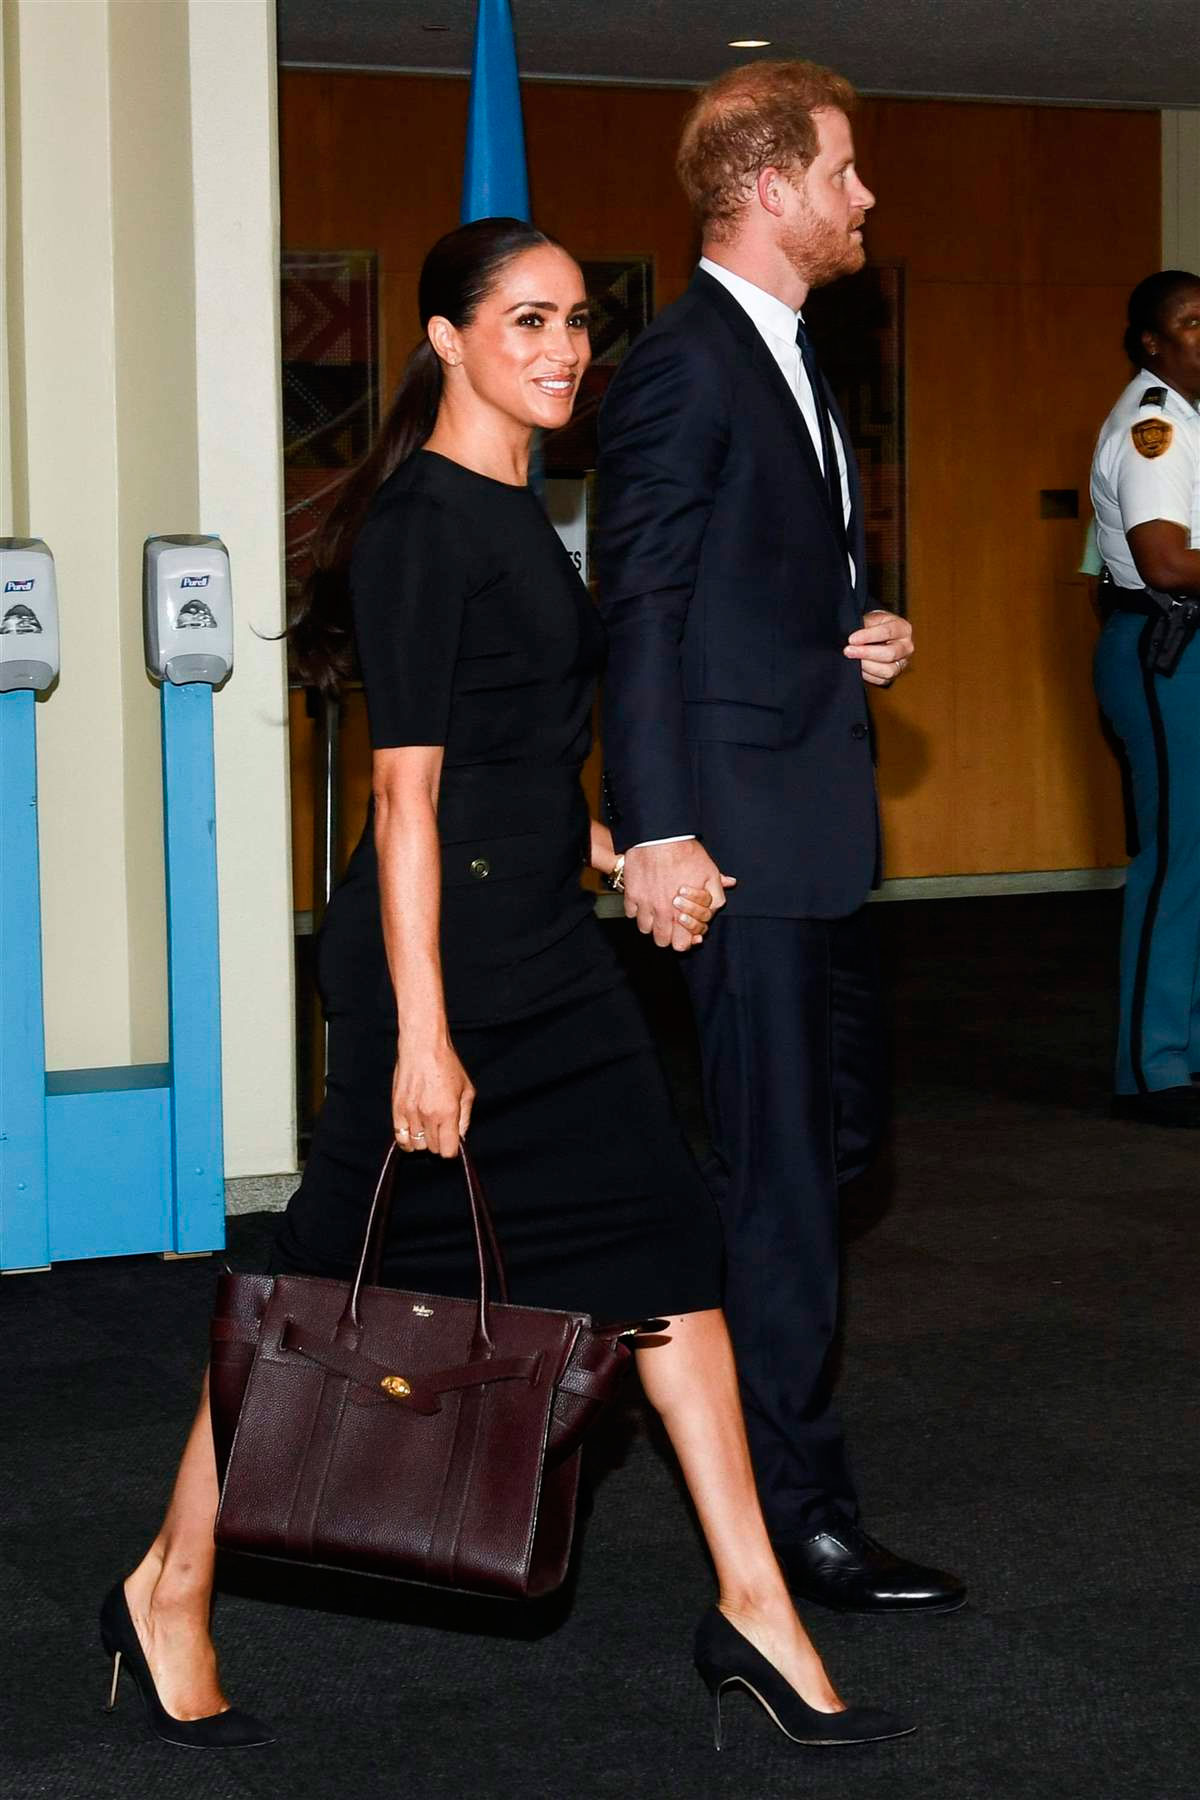 Meghan Markle at the United Nations